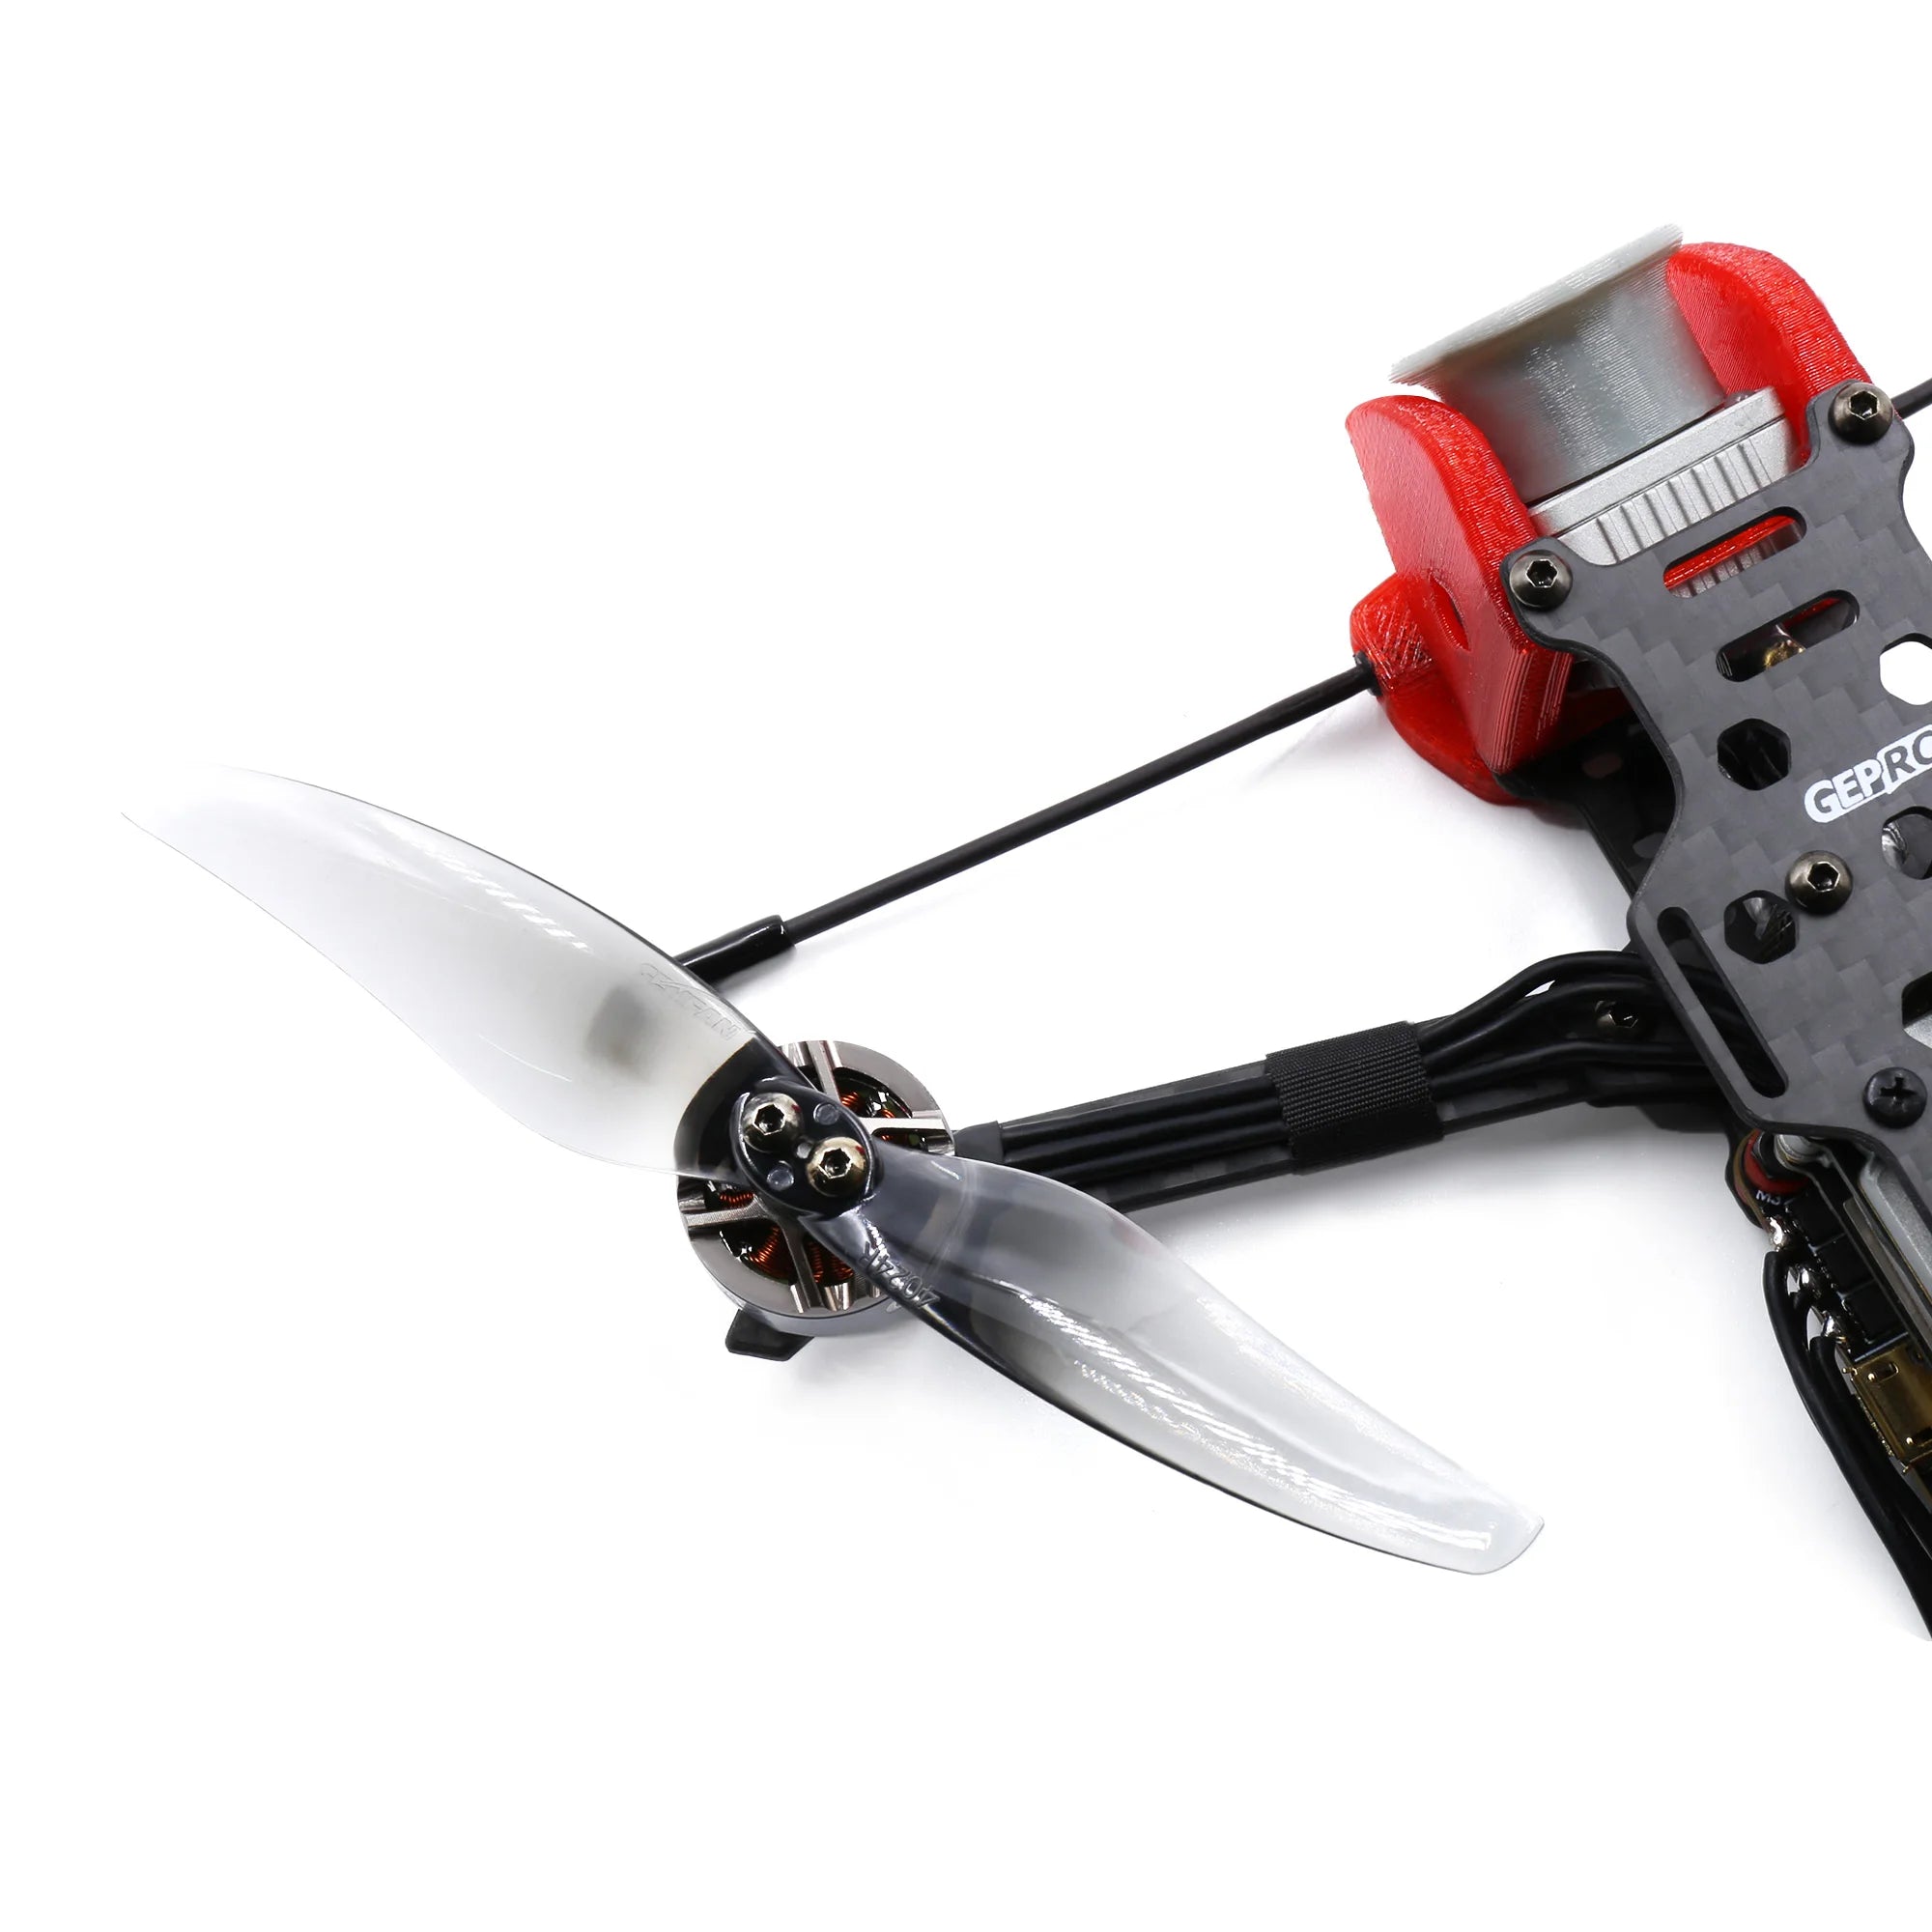 GEPRC Crocodile Baby 4 FPV Drone, ,The Rescue mode won’t landing automatically.